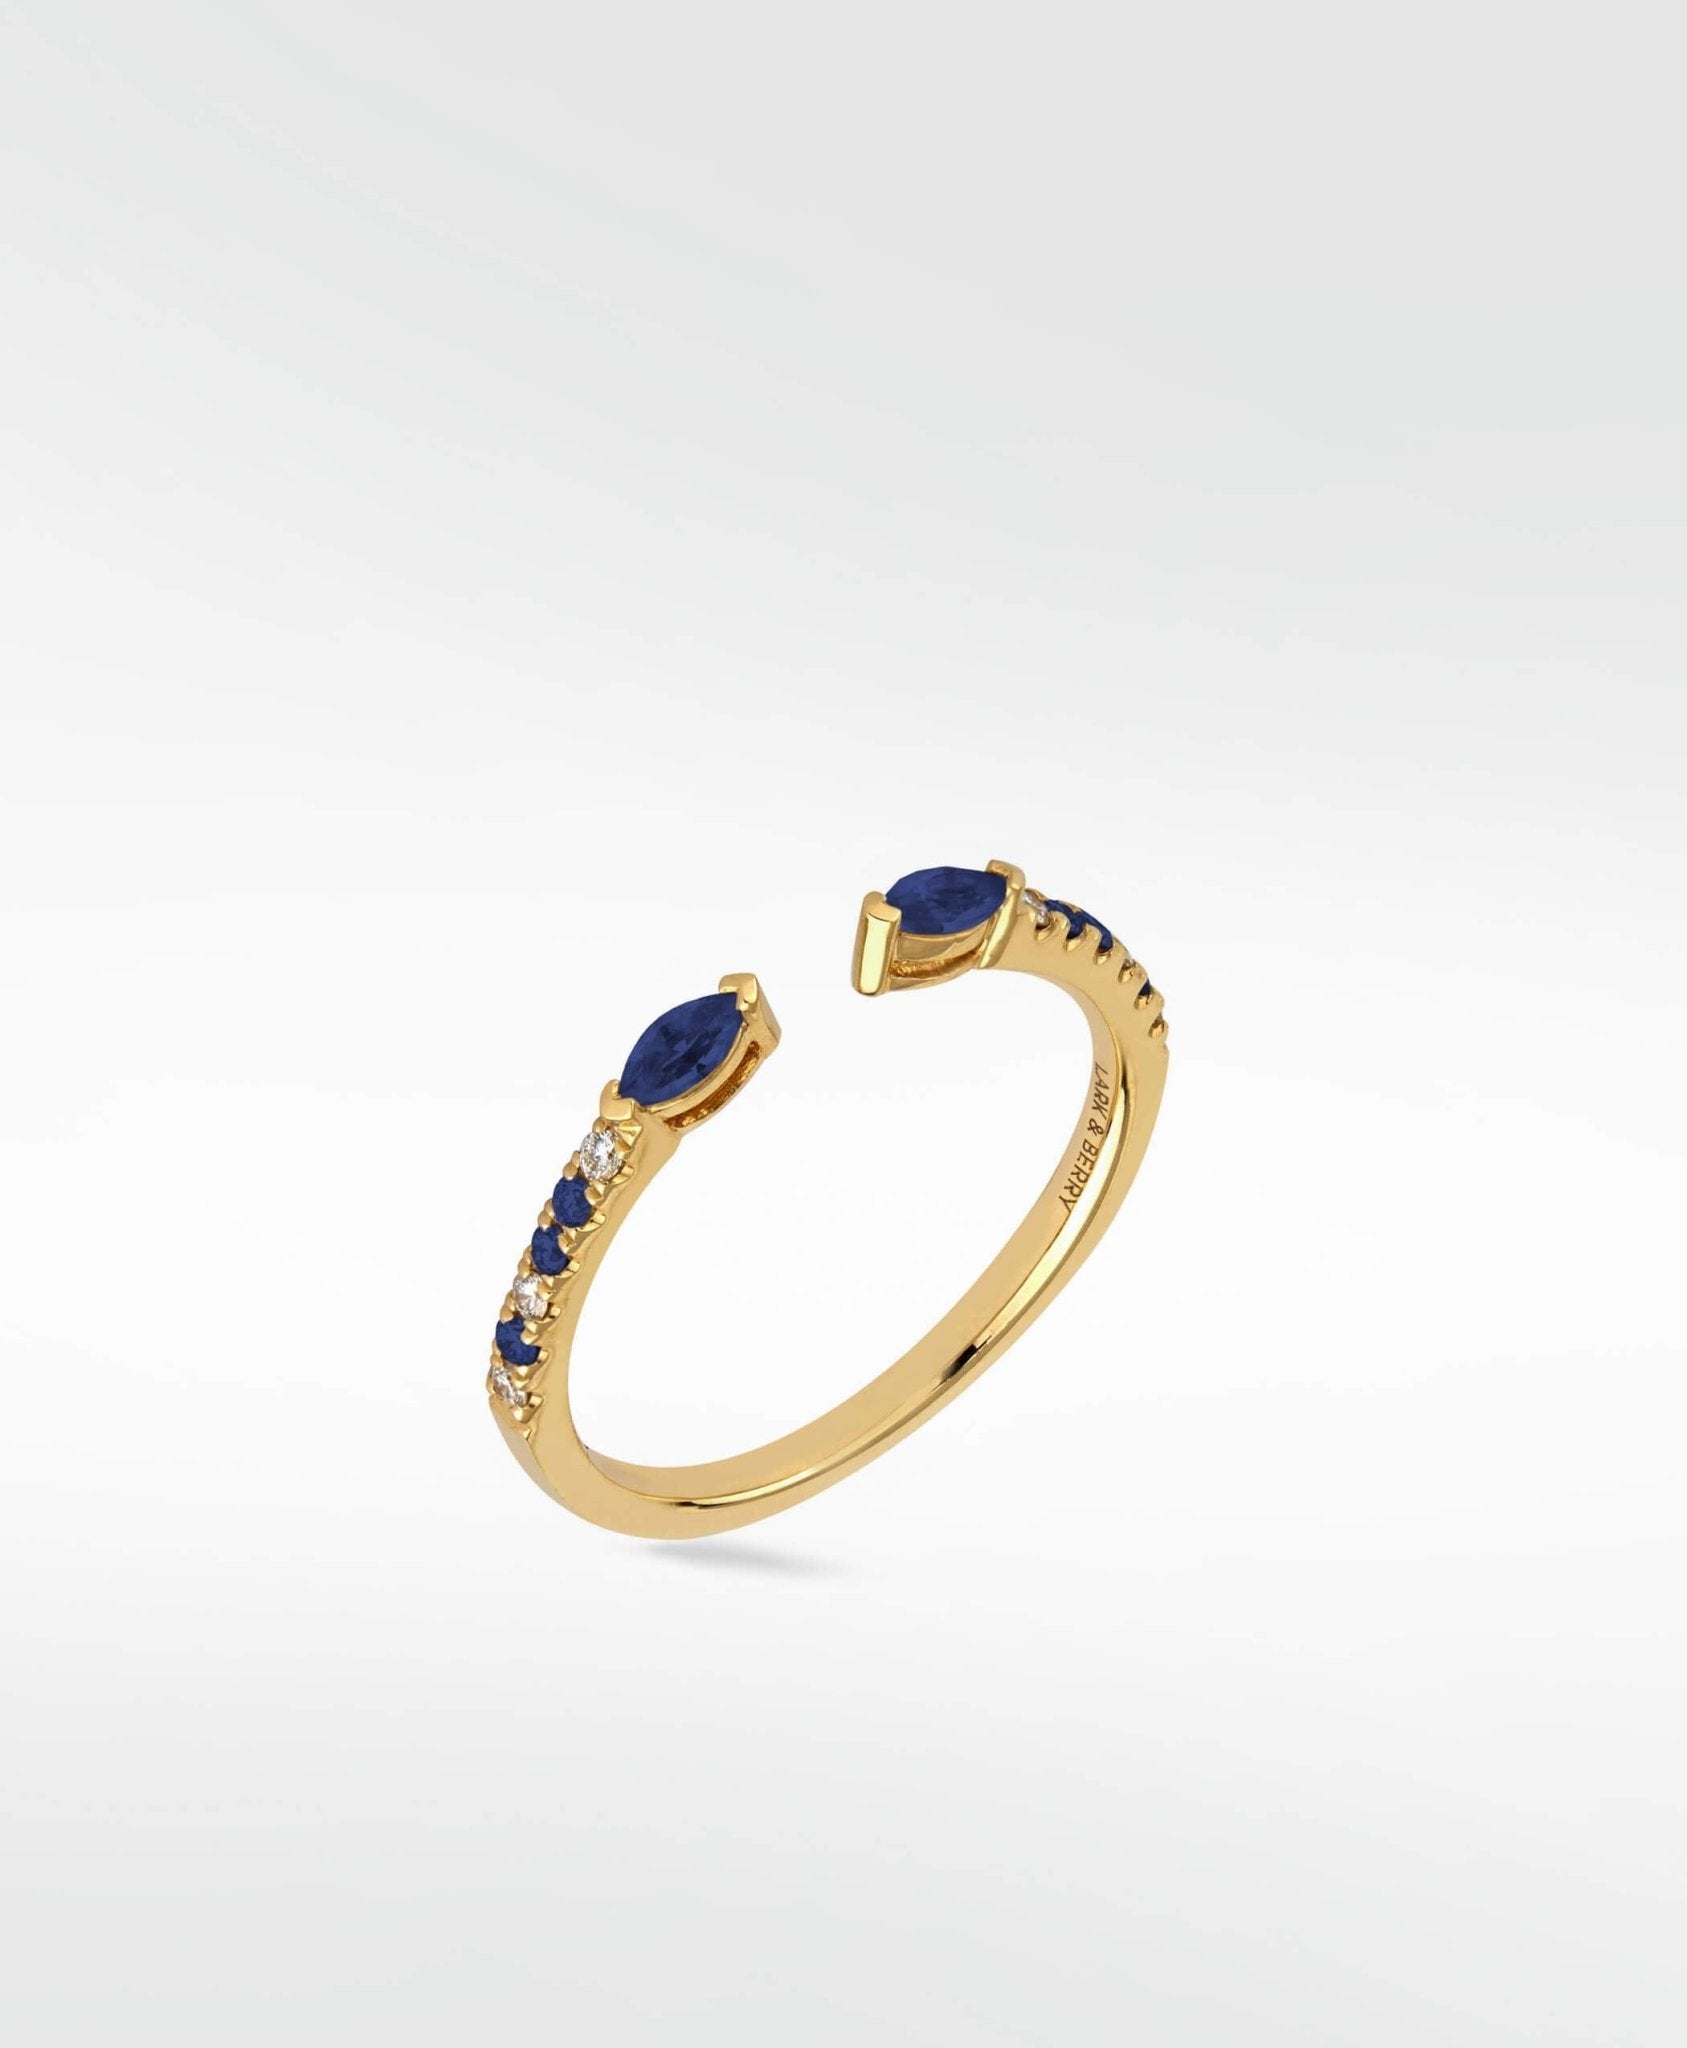 Veto Open Stackable Ring- Blue Sapphire in 14K Gold - Lark and Berry